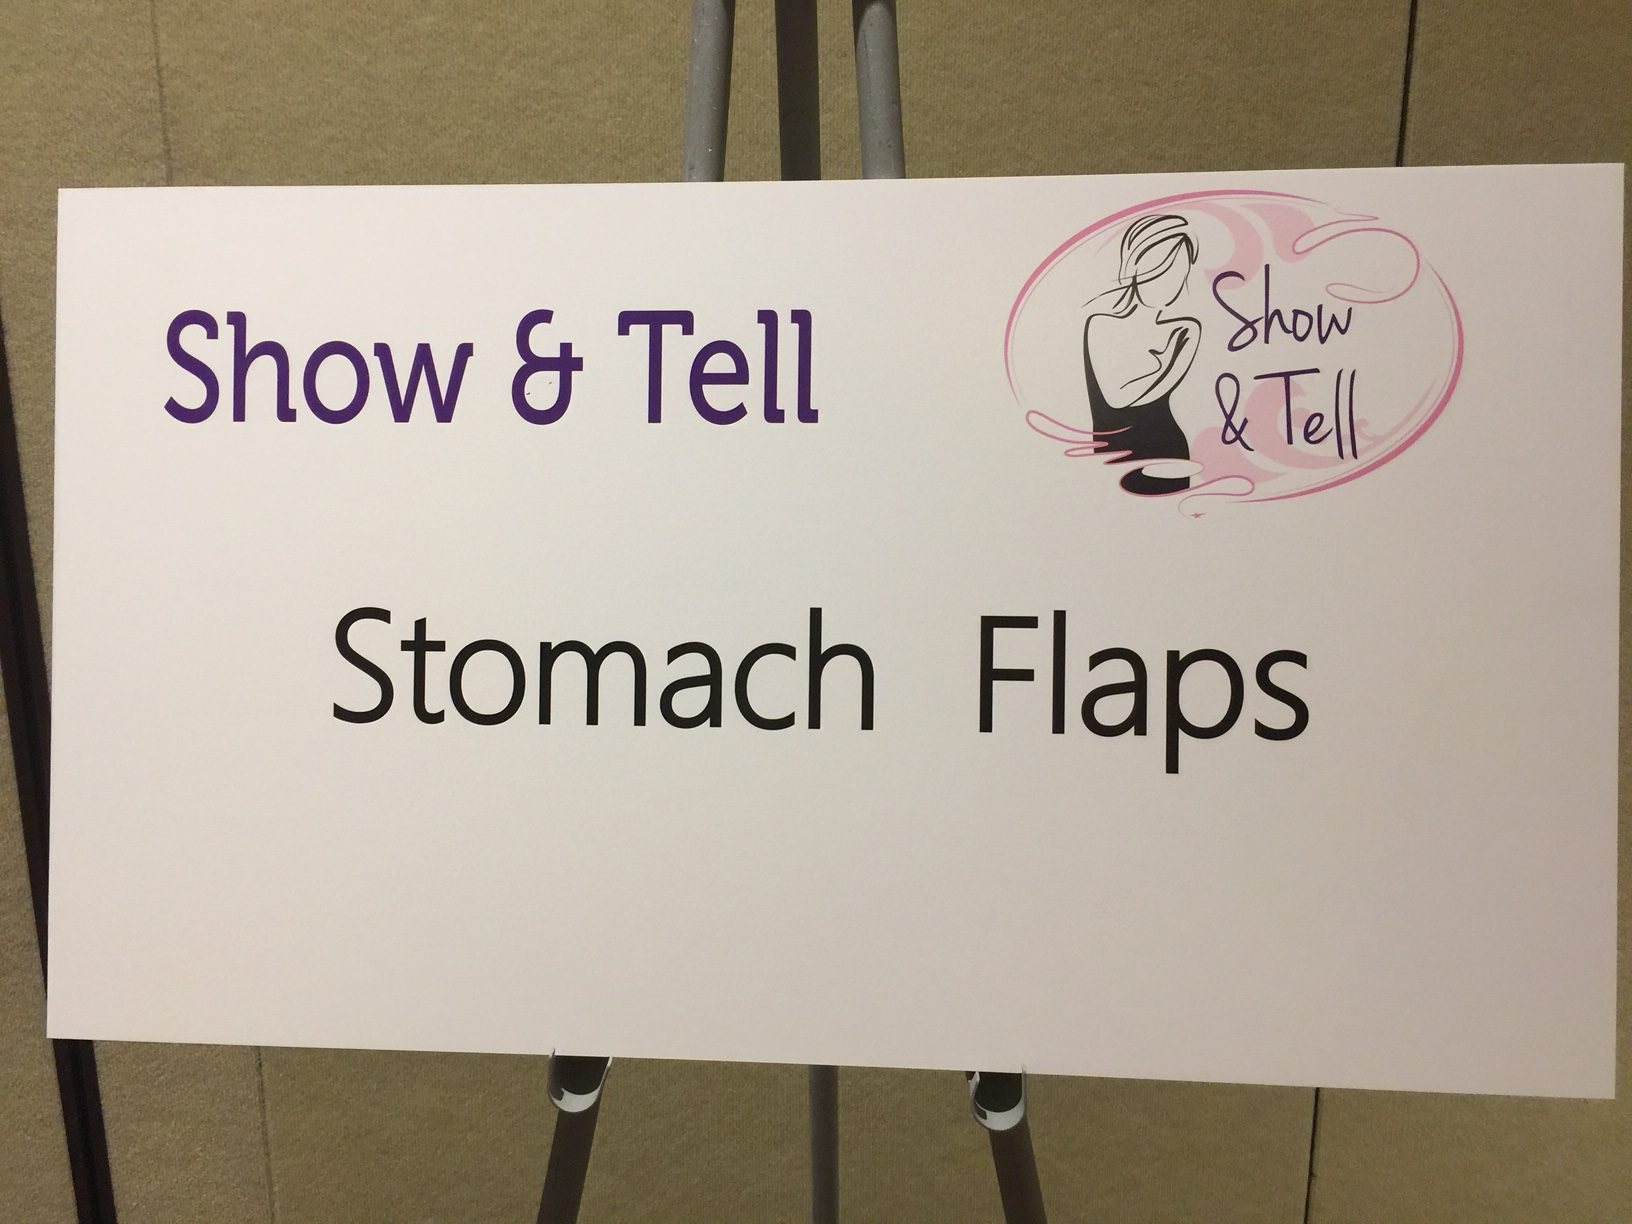 show and tell - stomach flaps